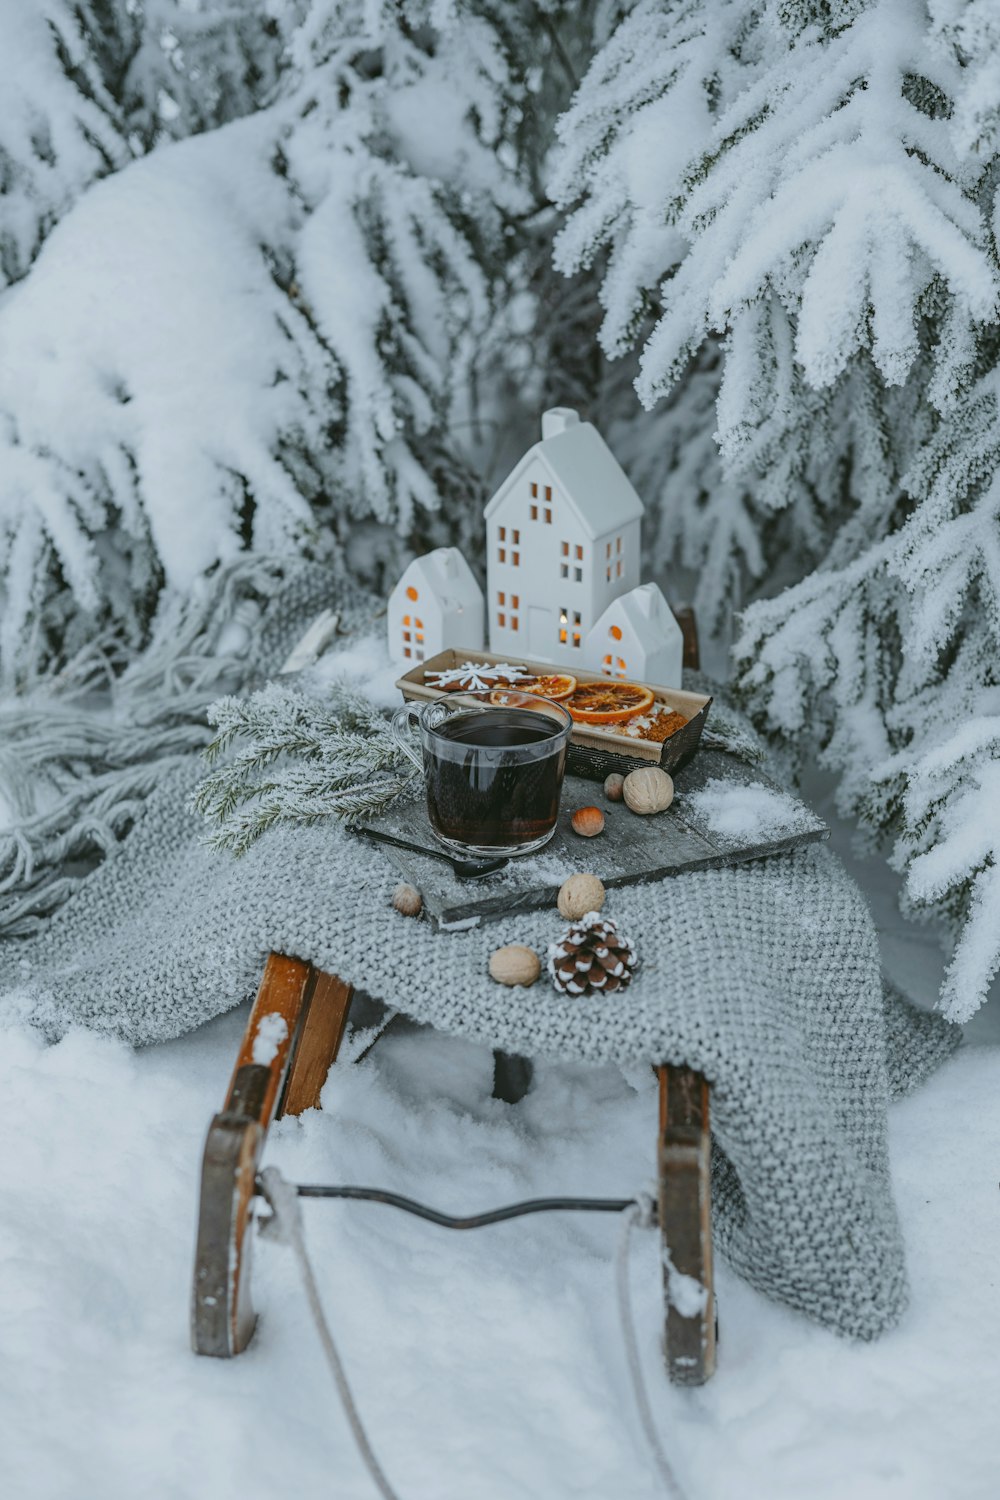 a sled with a cup of coffee on it in the snow